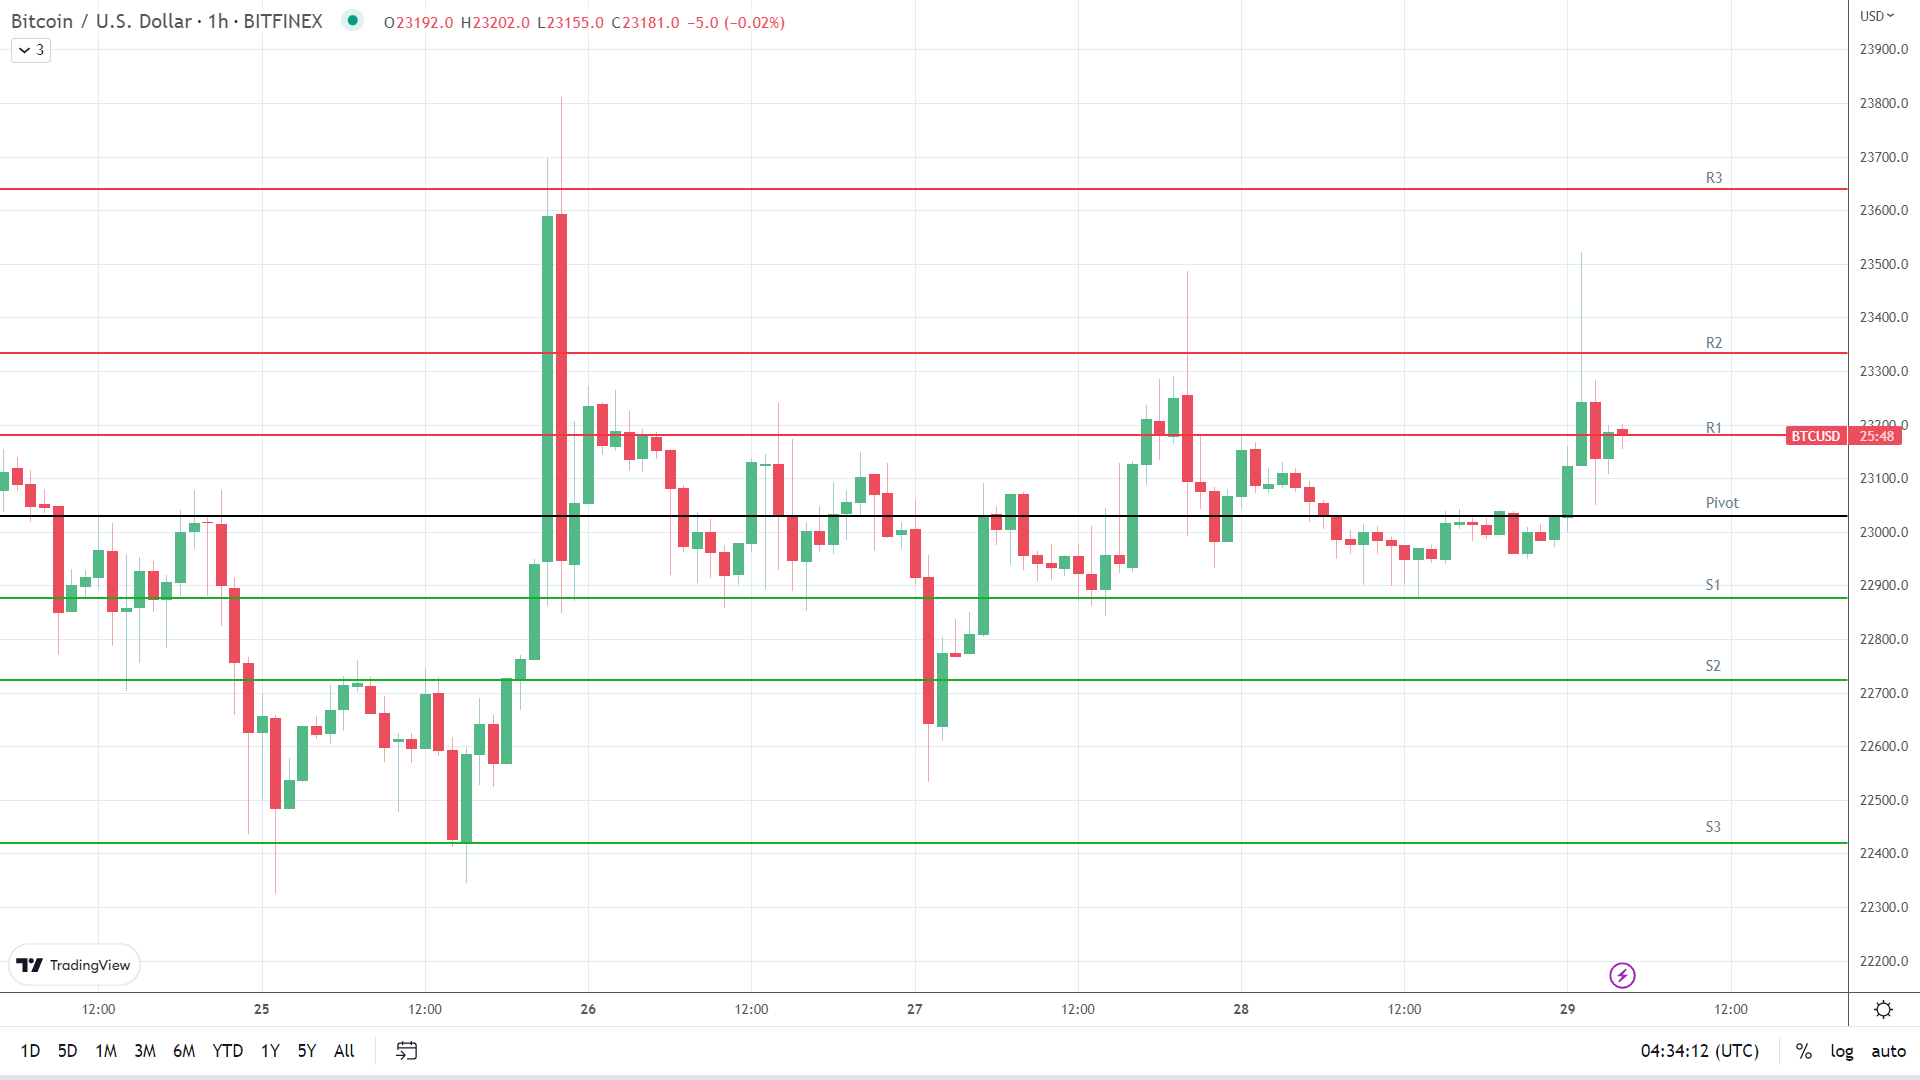 BTC resistance levels in play early.